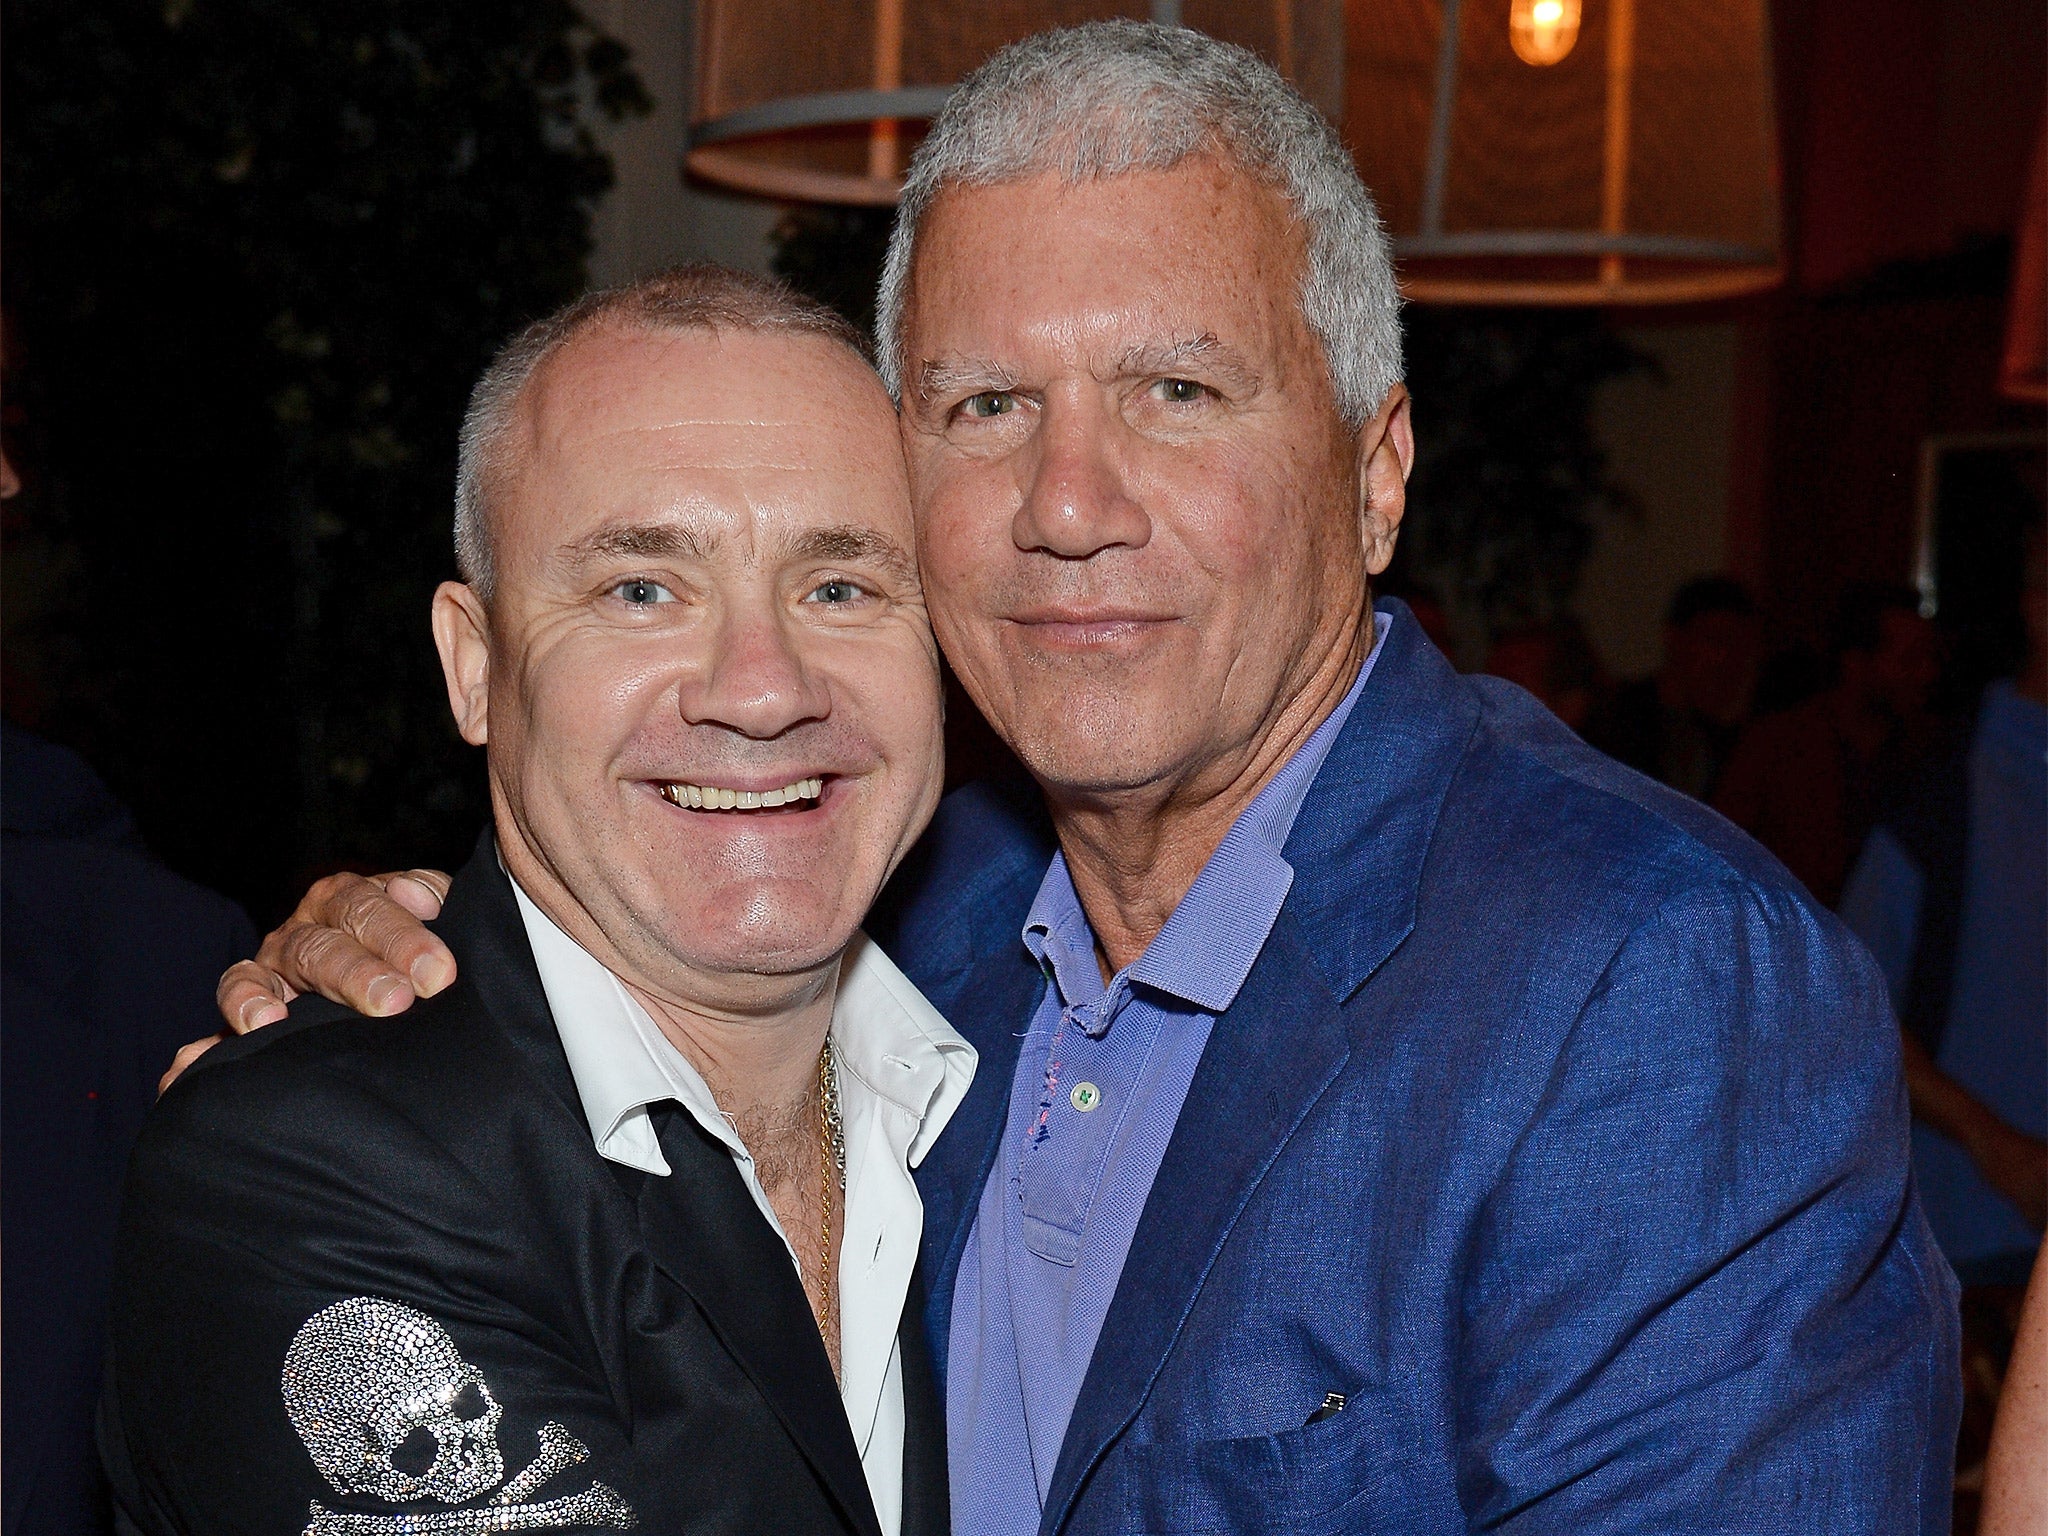 Art dealer and number six on the list, Larry Gagosian, right, with Damien Hirst in 2013 (Getty)